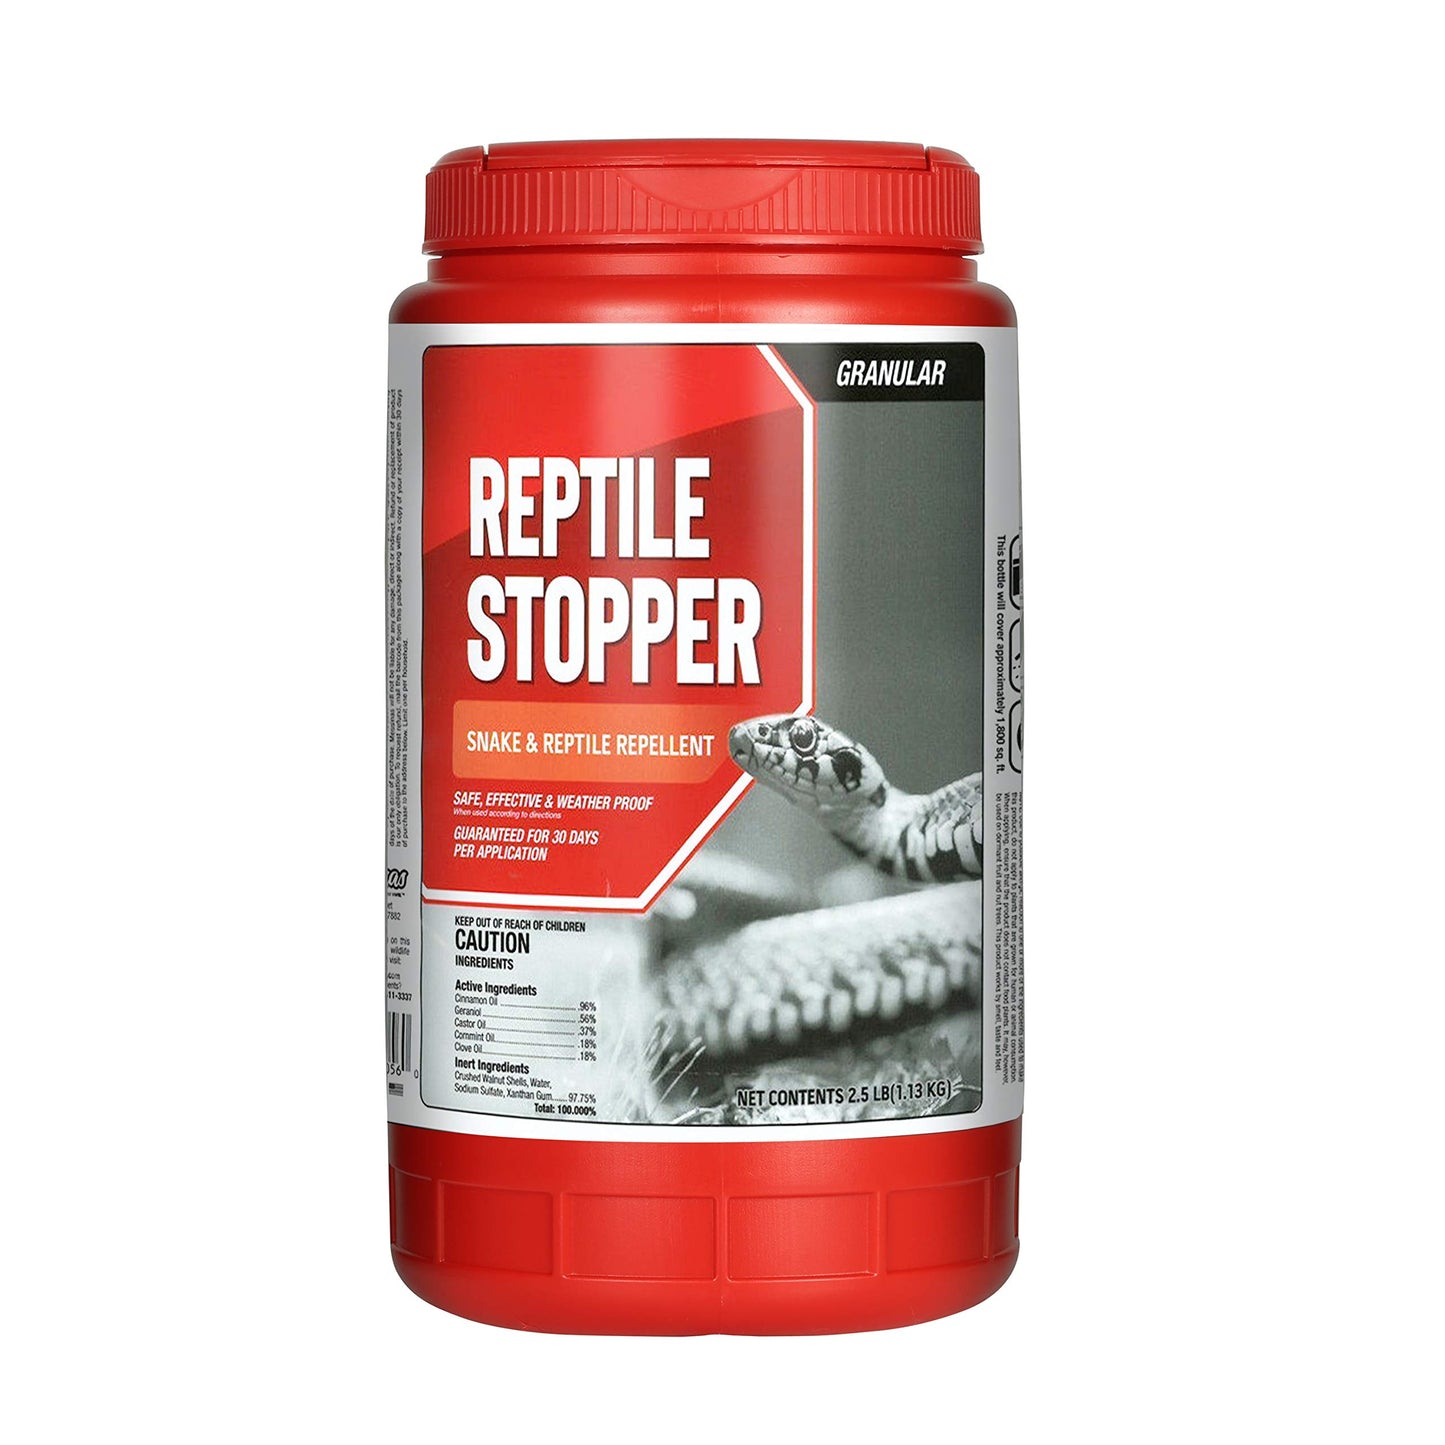 Reptile Stopper Granular Repellent - Safe & Effective, All Natural Food Grade Ingredients; Repels Snakes and Other Reptiles; Ready to Use, 2.5 lb Shaker Jug